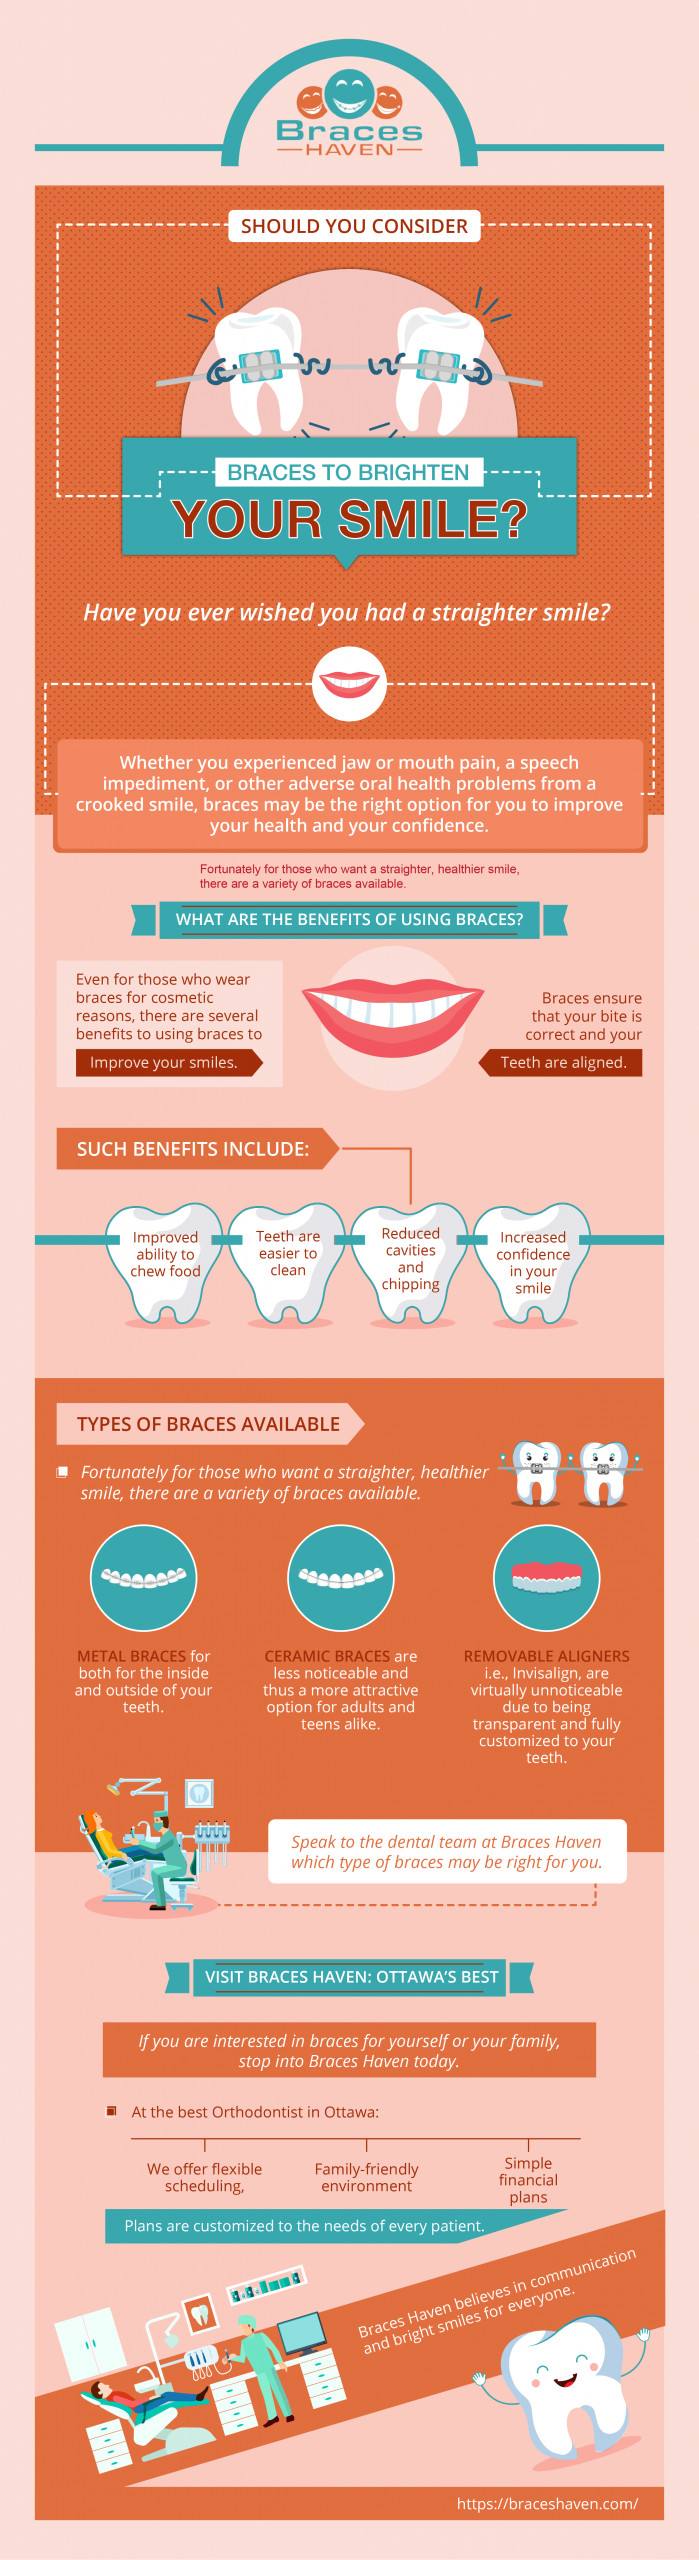 Should You Consider Braces to Brighten Your Smile?